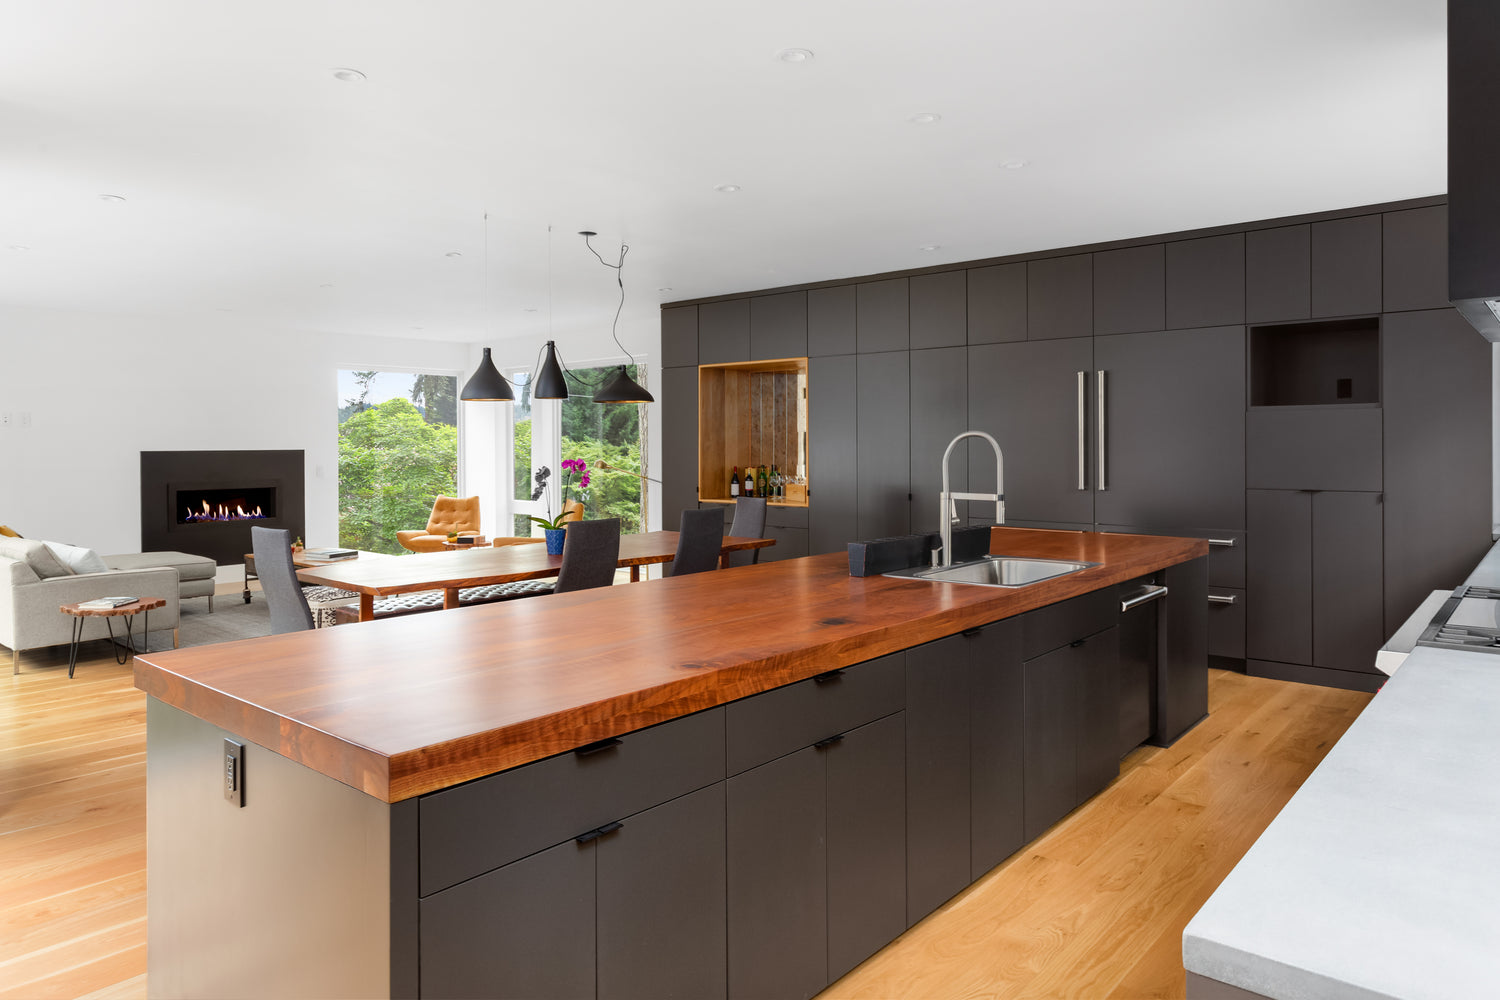 Top 4 Latest Kitchen Trends and Design